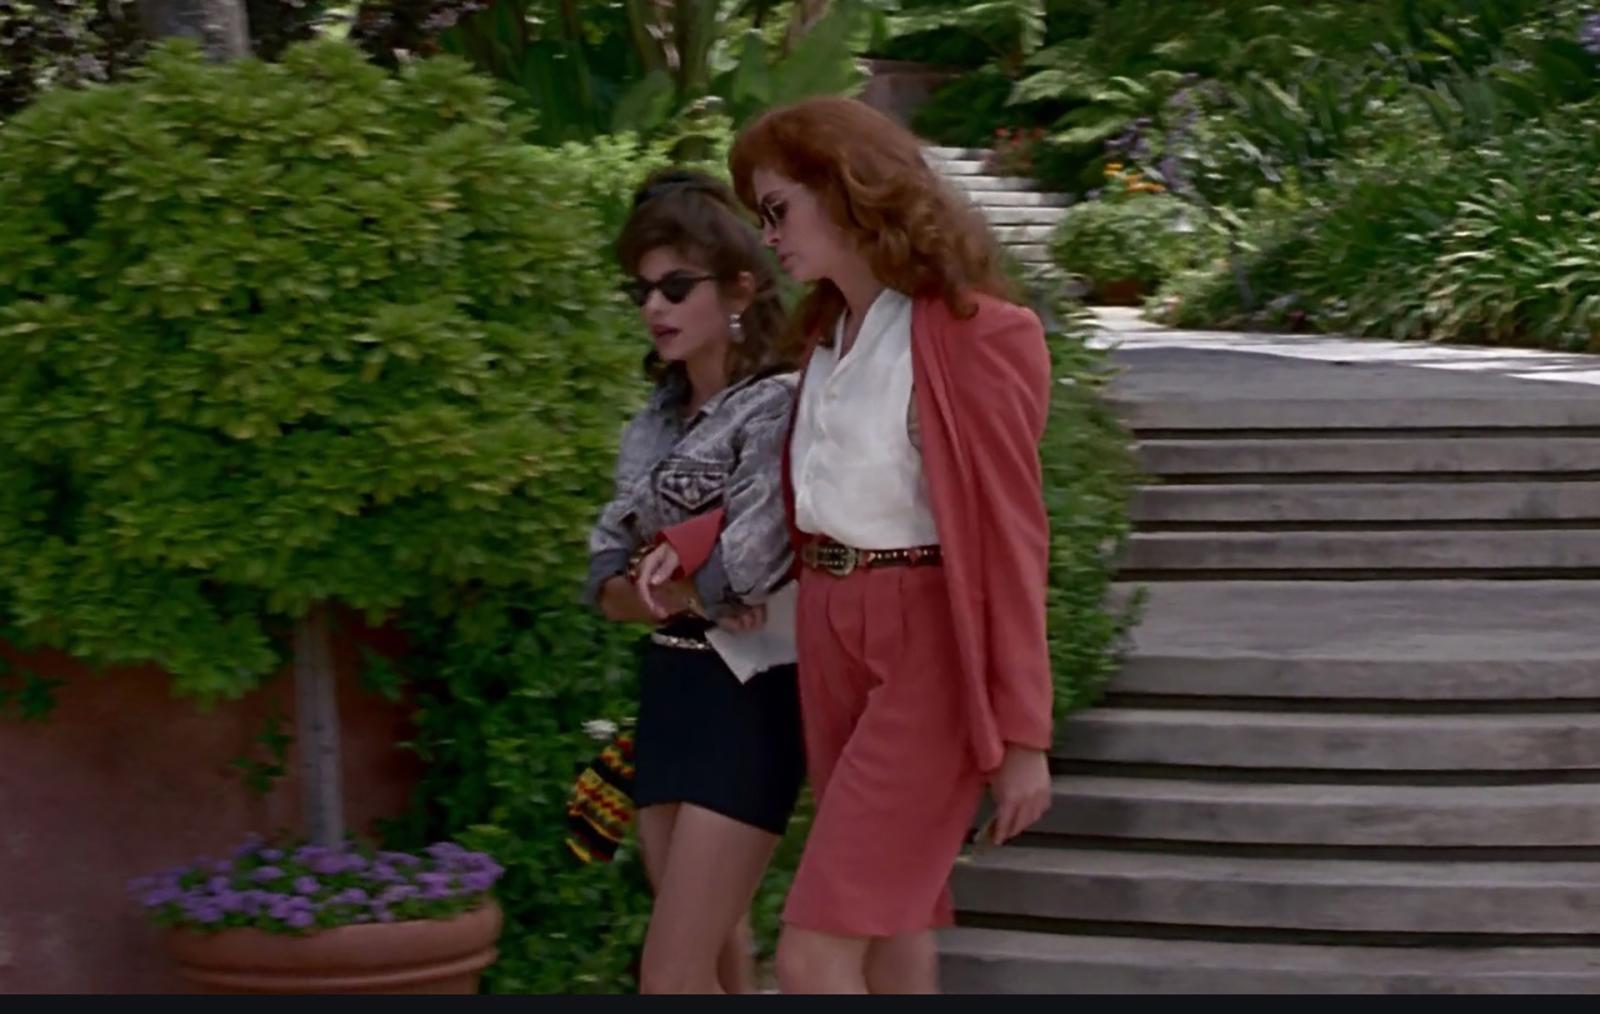 1990s Movies Predicted the Future of Fashion With These 9 Iconic Outfits - image 1